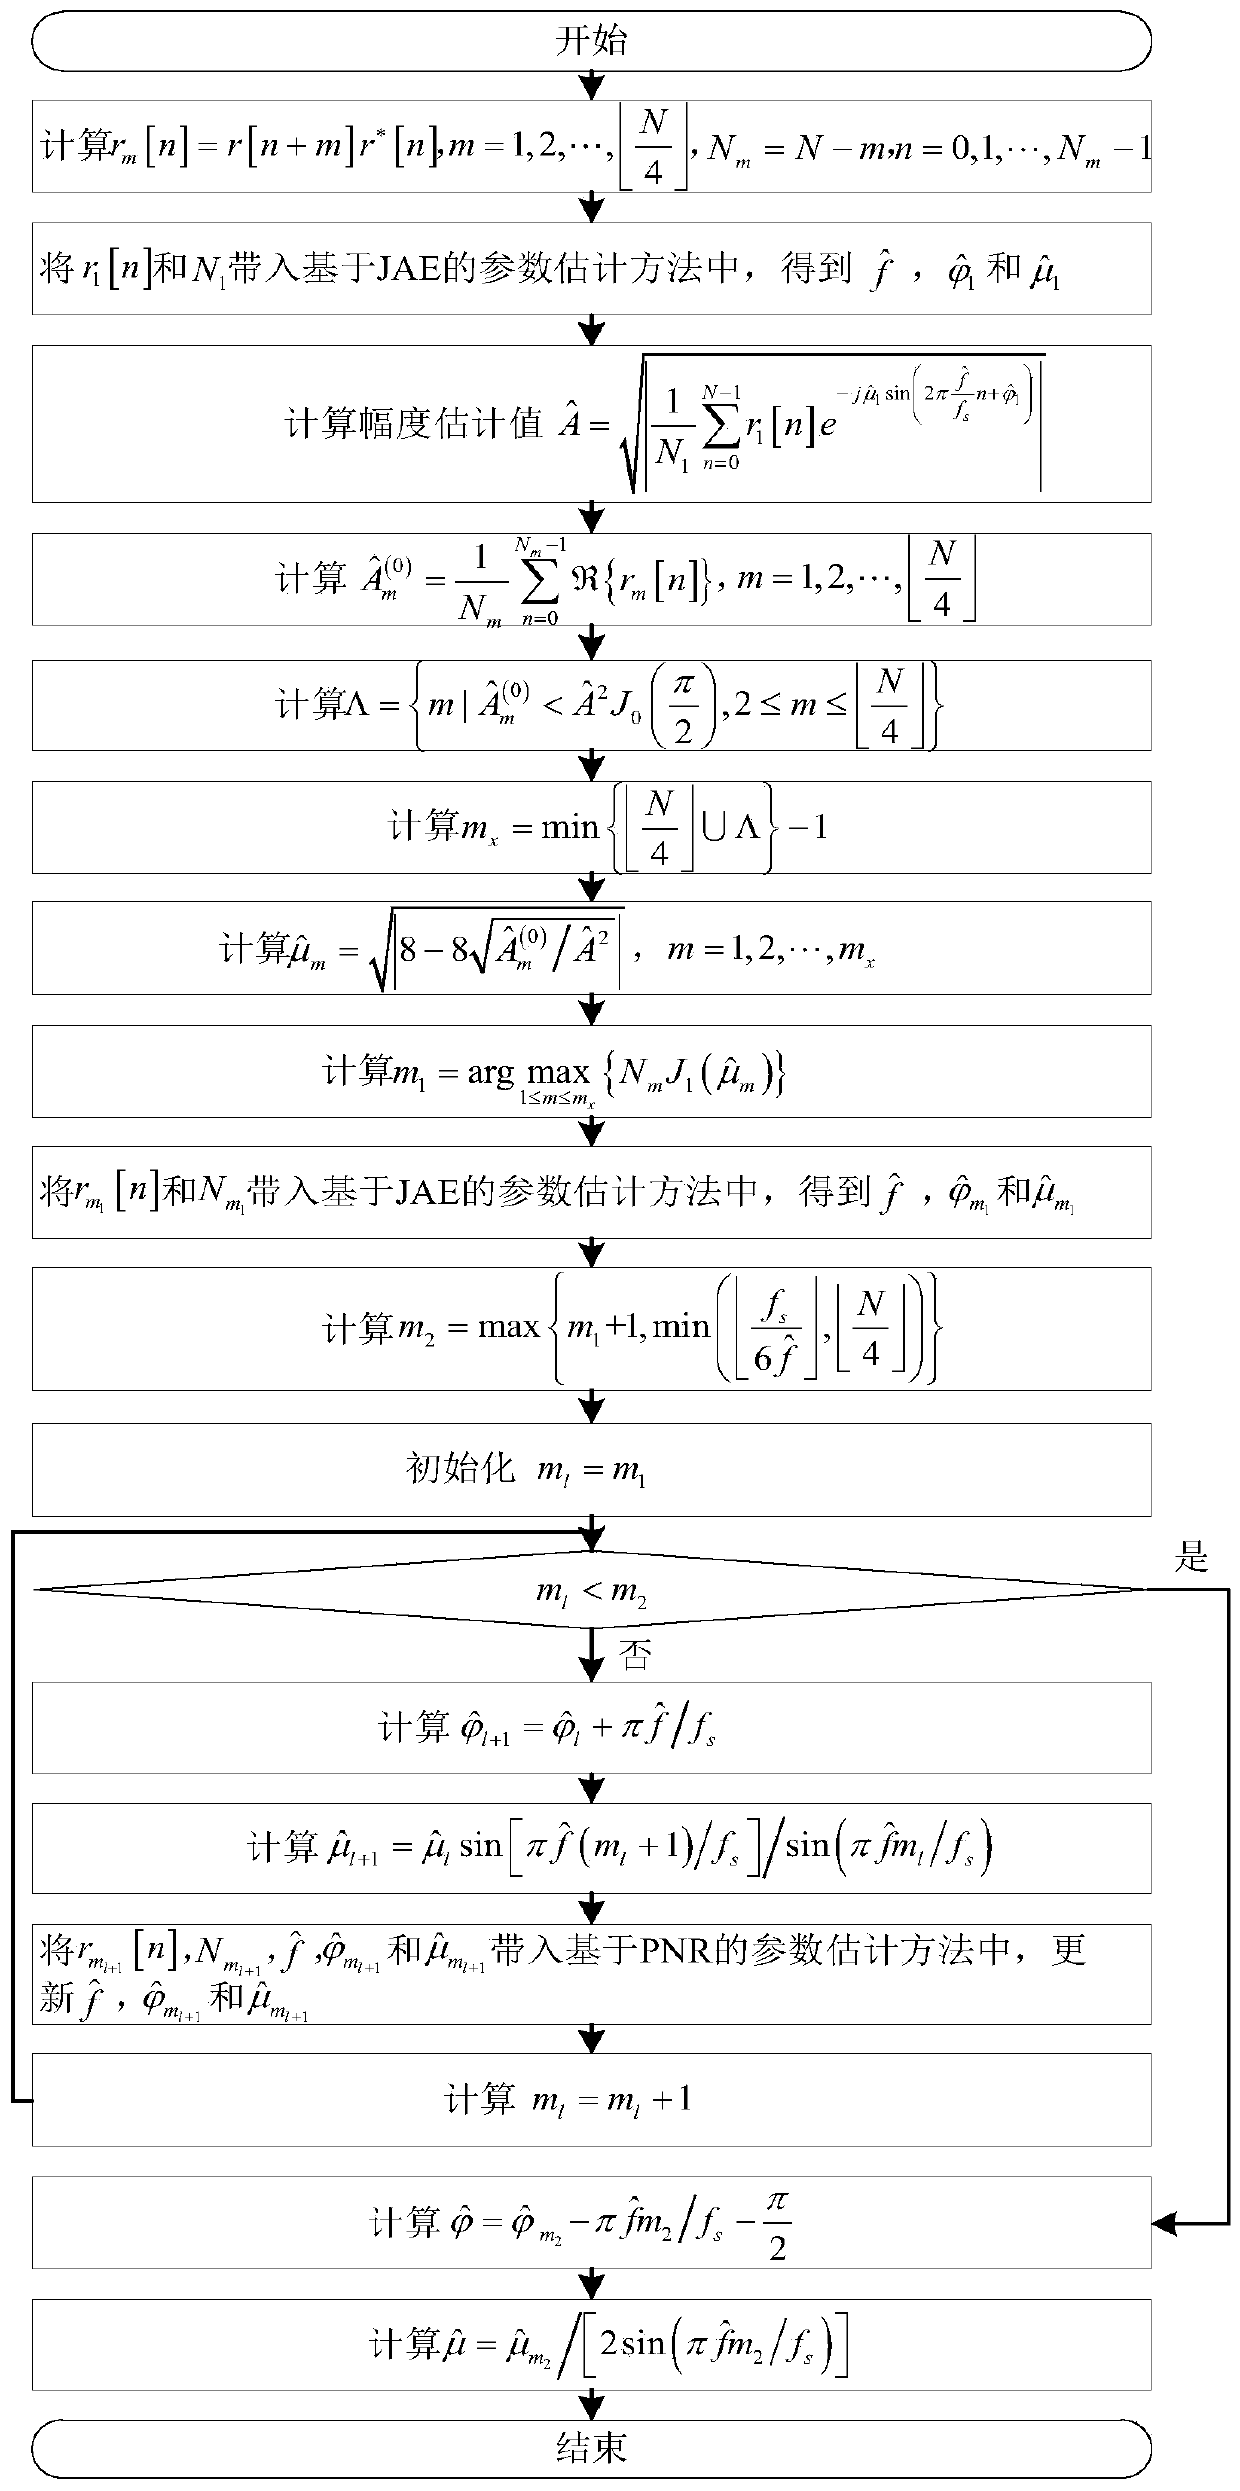 Sinusoidal frequency-modulated signal parameter estimation method